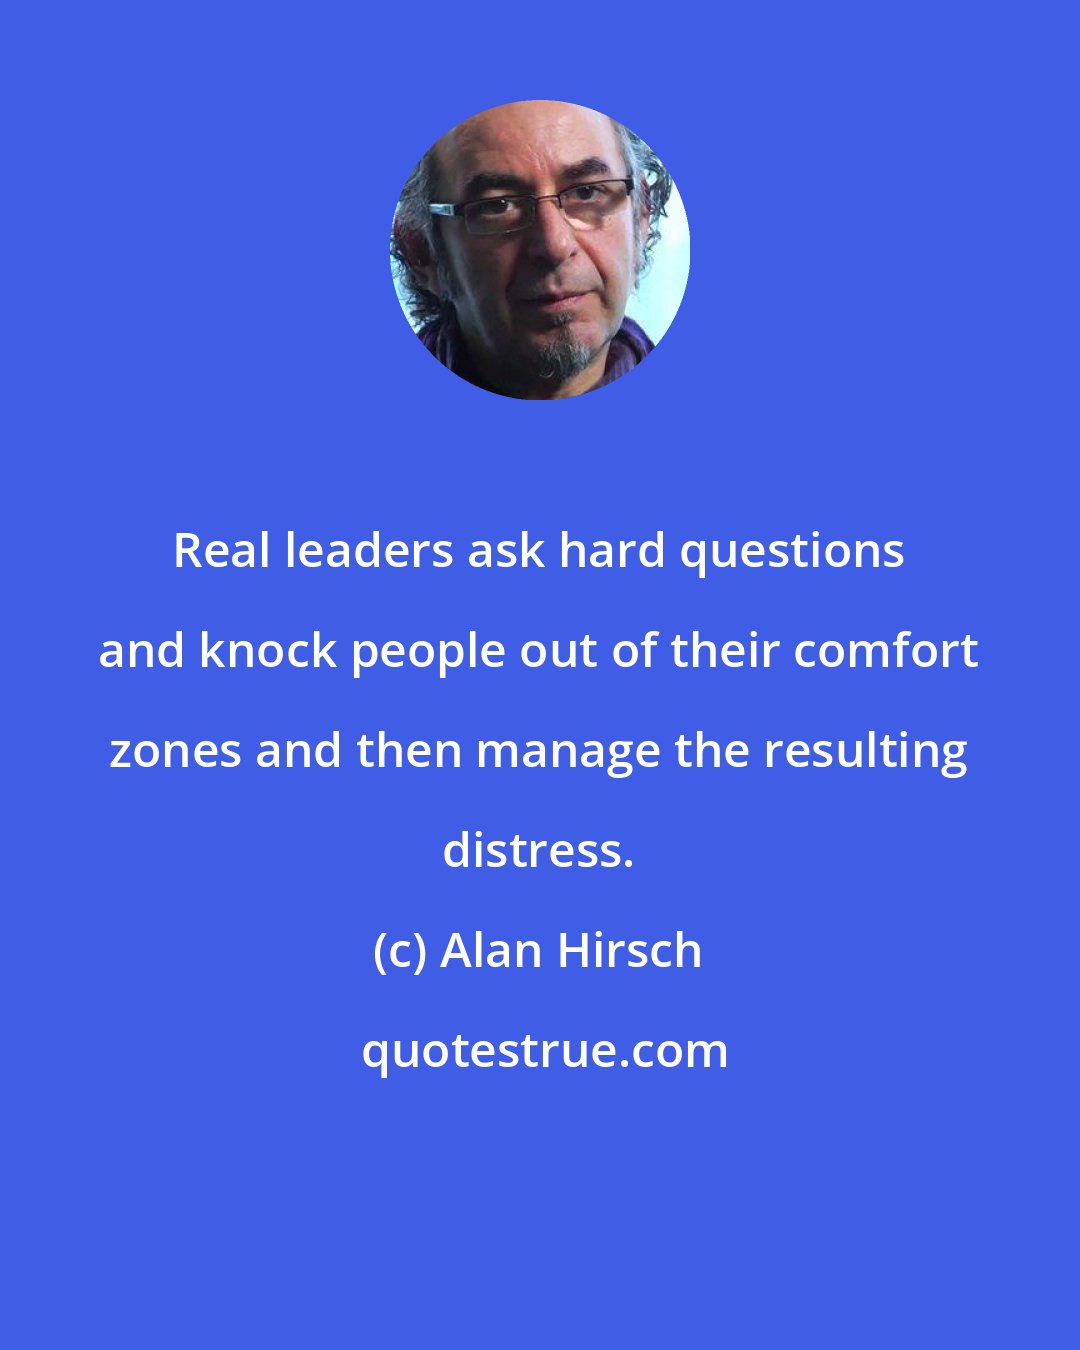 Alan Hirsch: Real leaders ask hard questions and knock people out of their comfort zones and then manage the resulting distress.